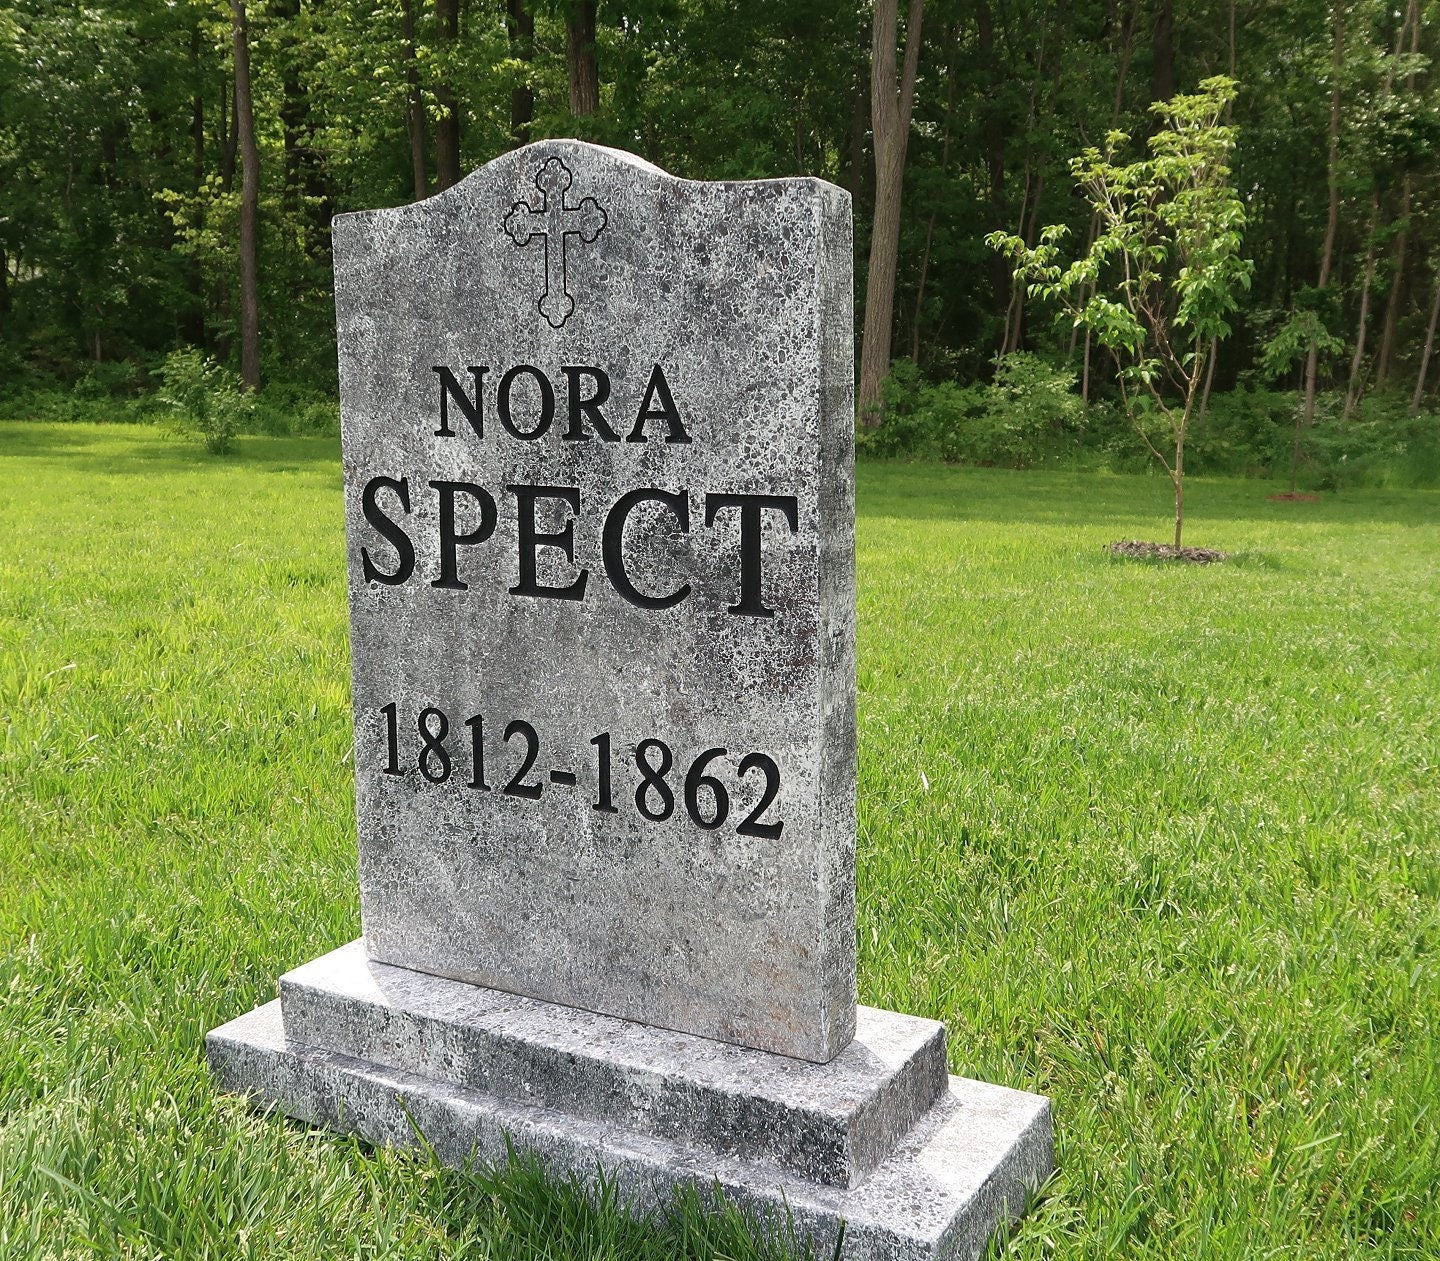 NORA SPECT Silly Halloween Tombstone Yard Prop